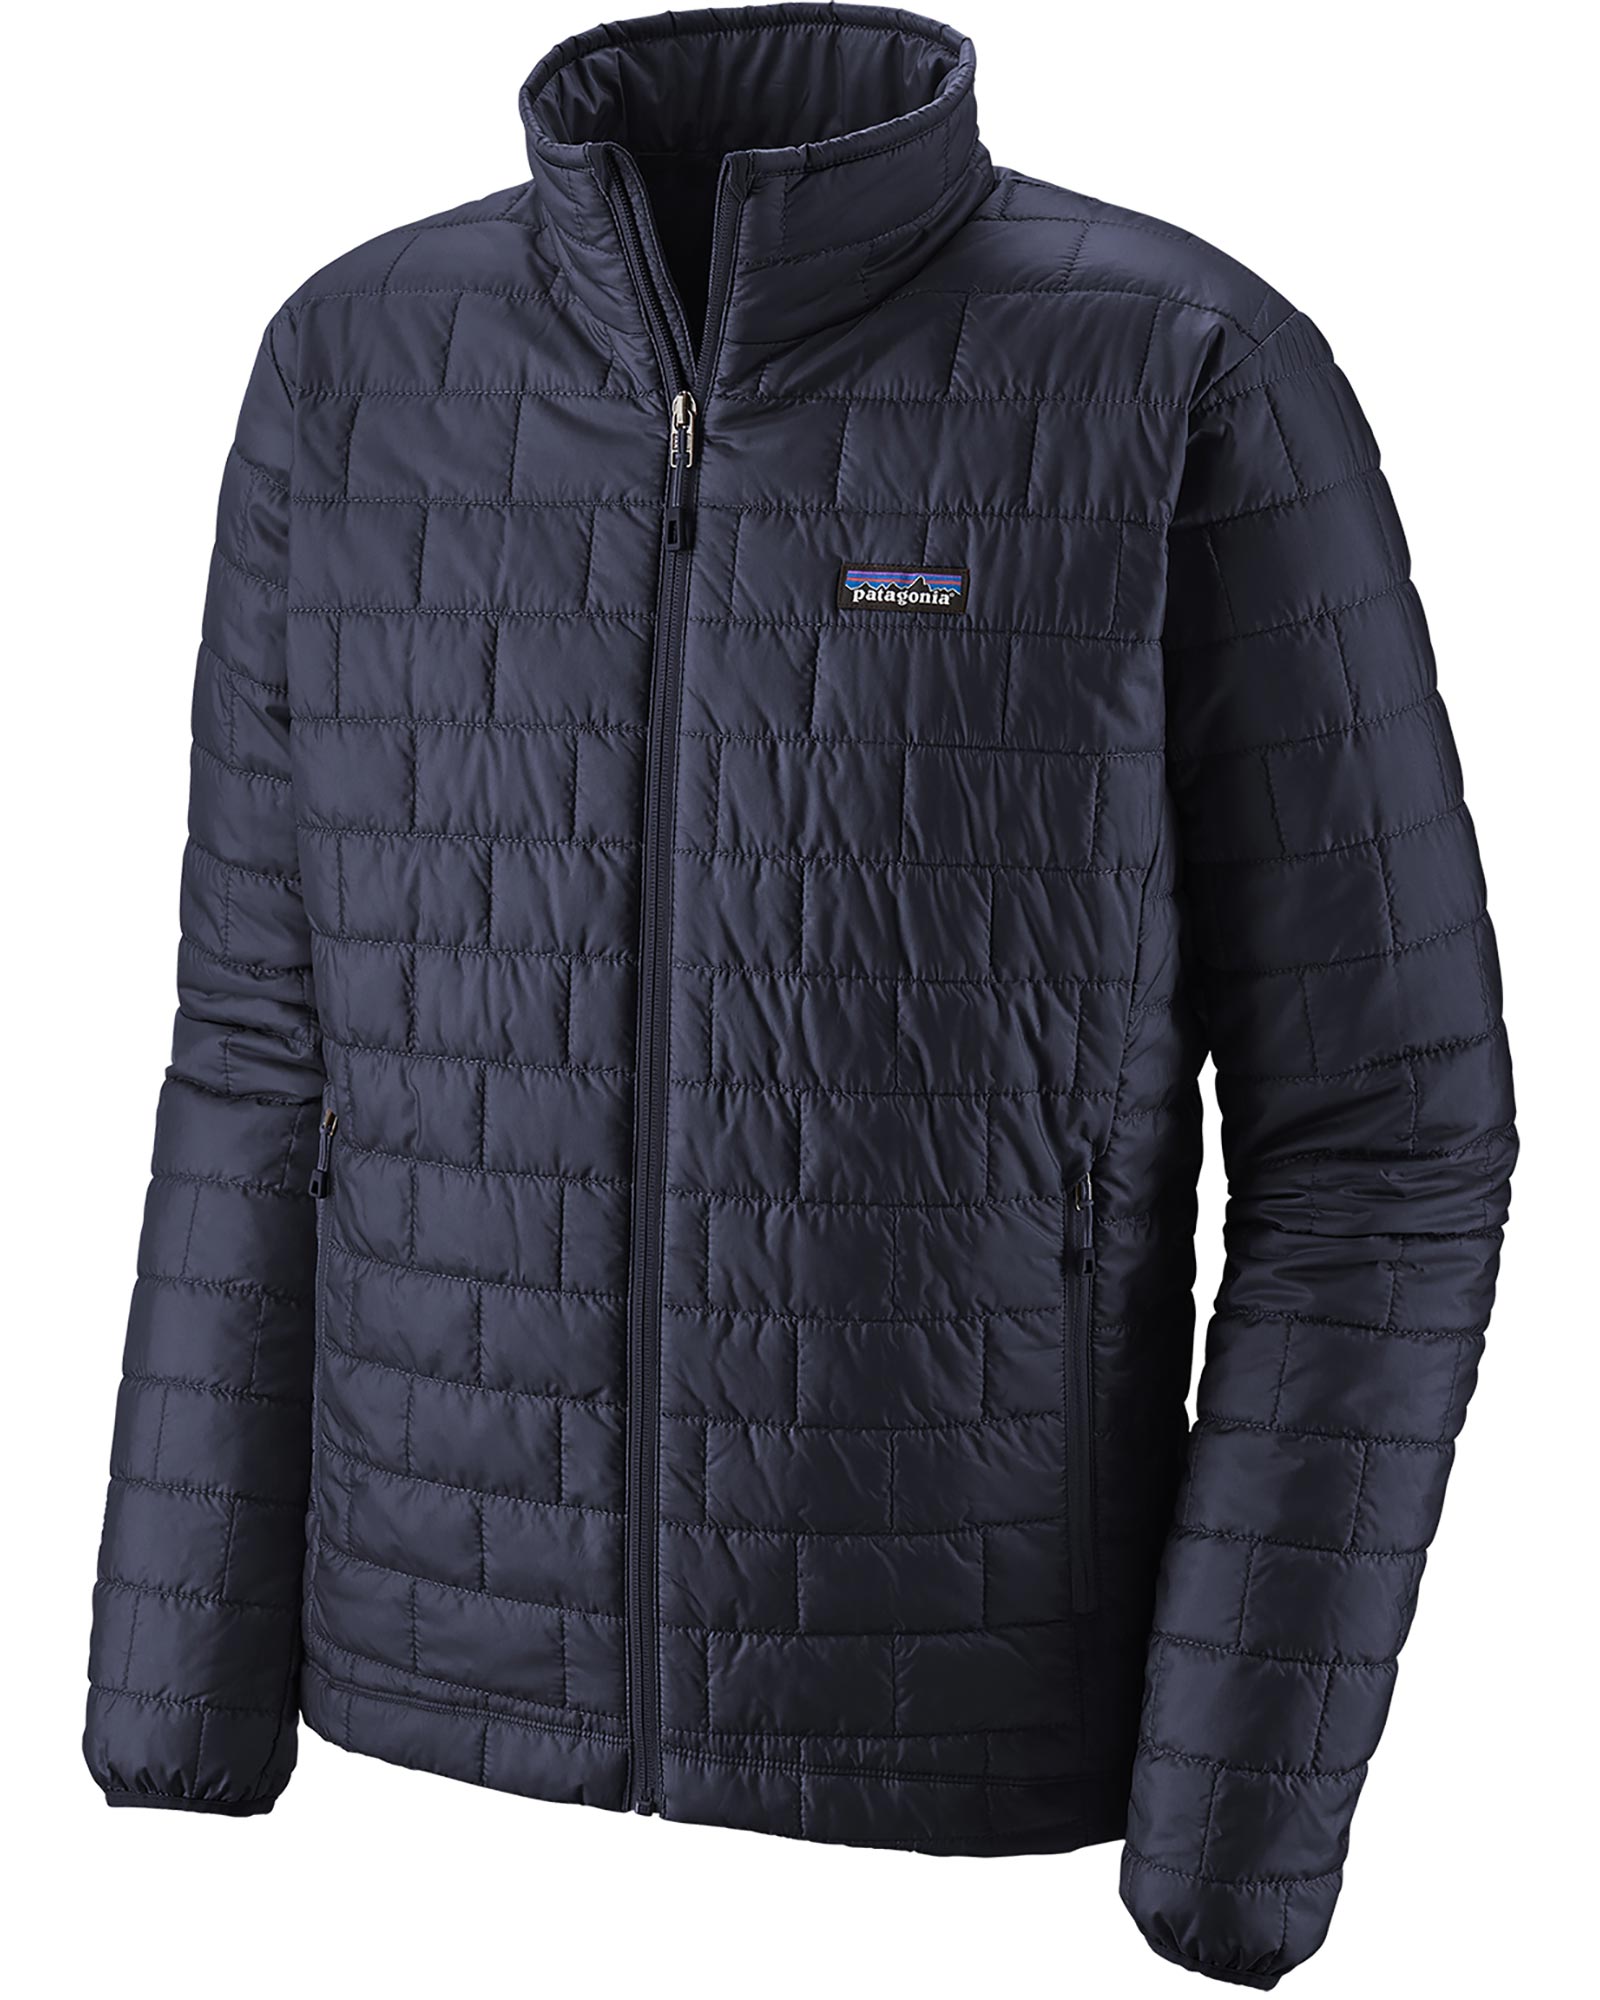 Patagonia Nano Puff Men’s Insulated Jacket - Classic Navy XL